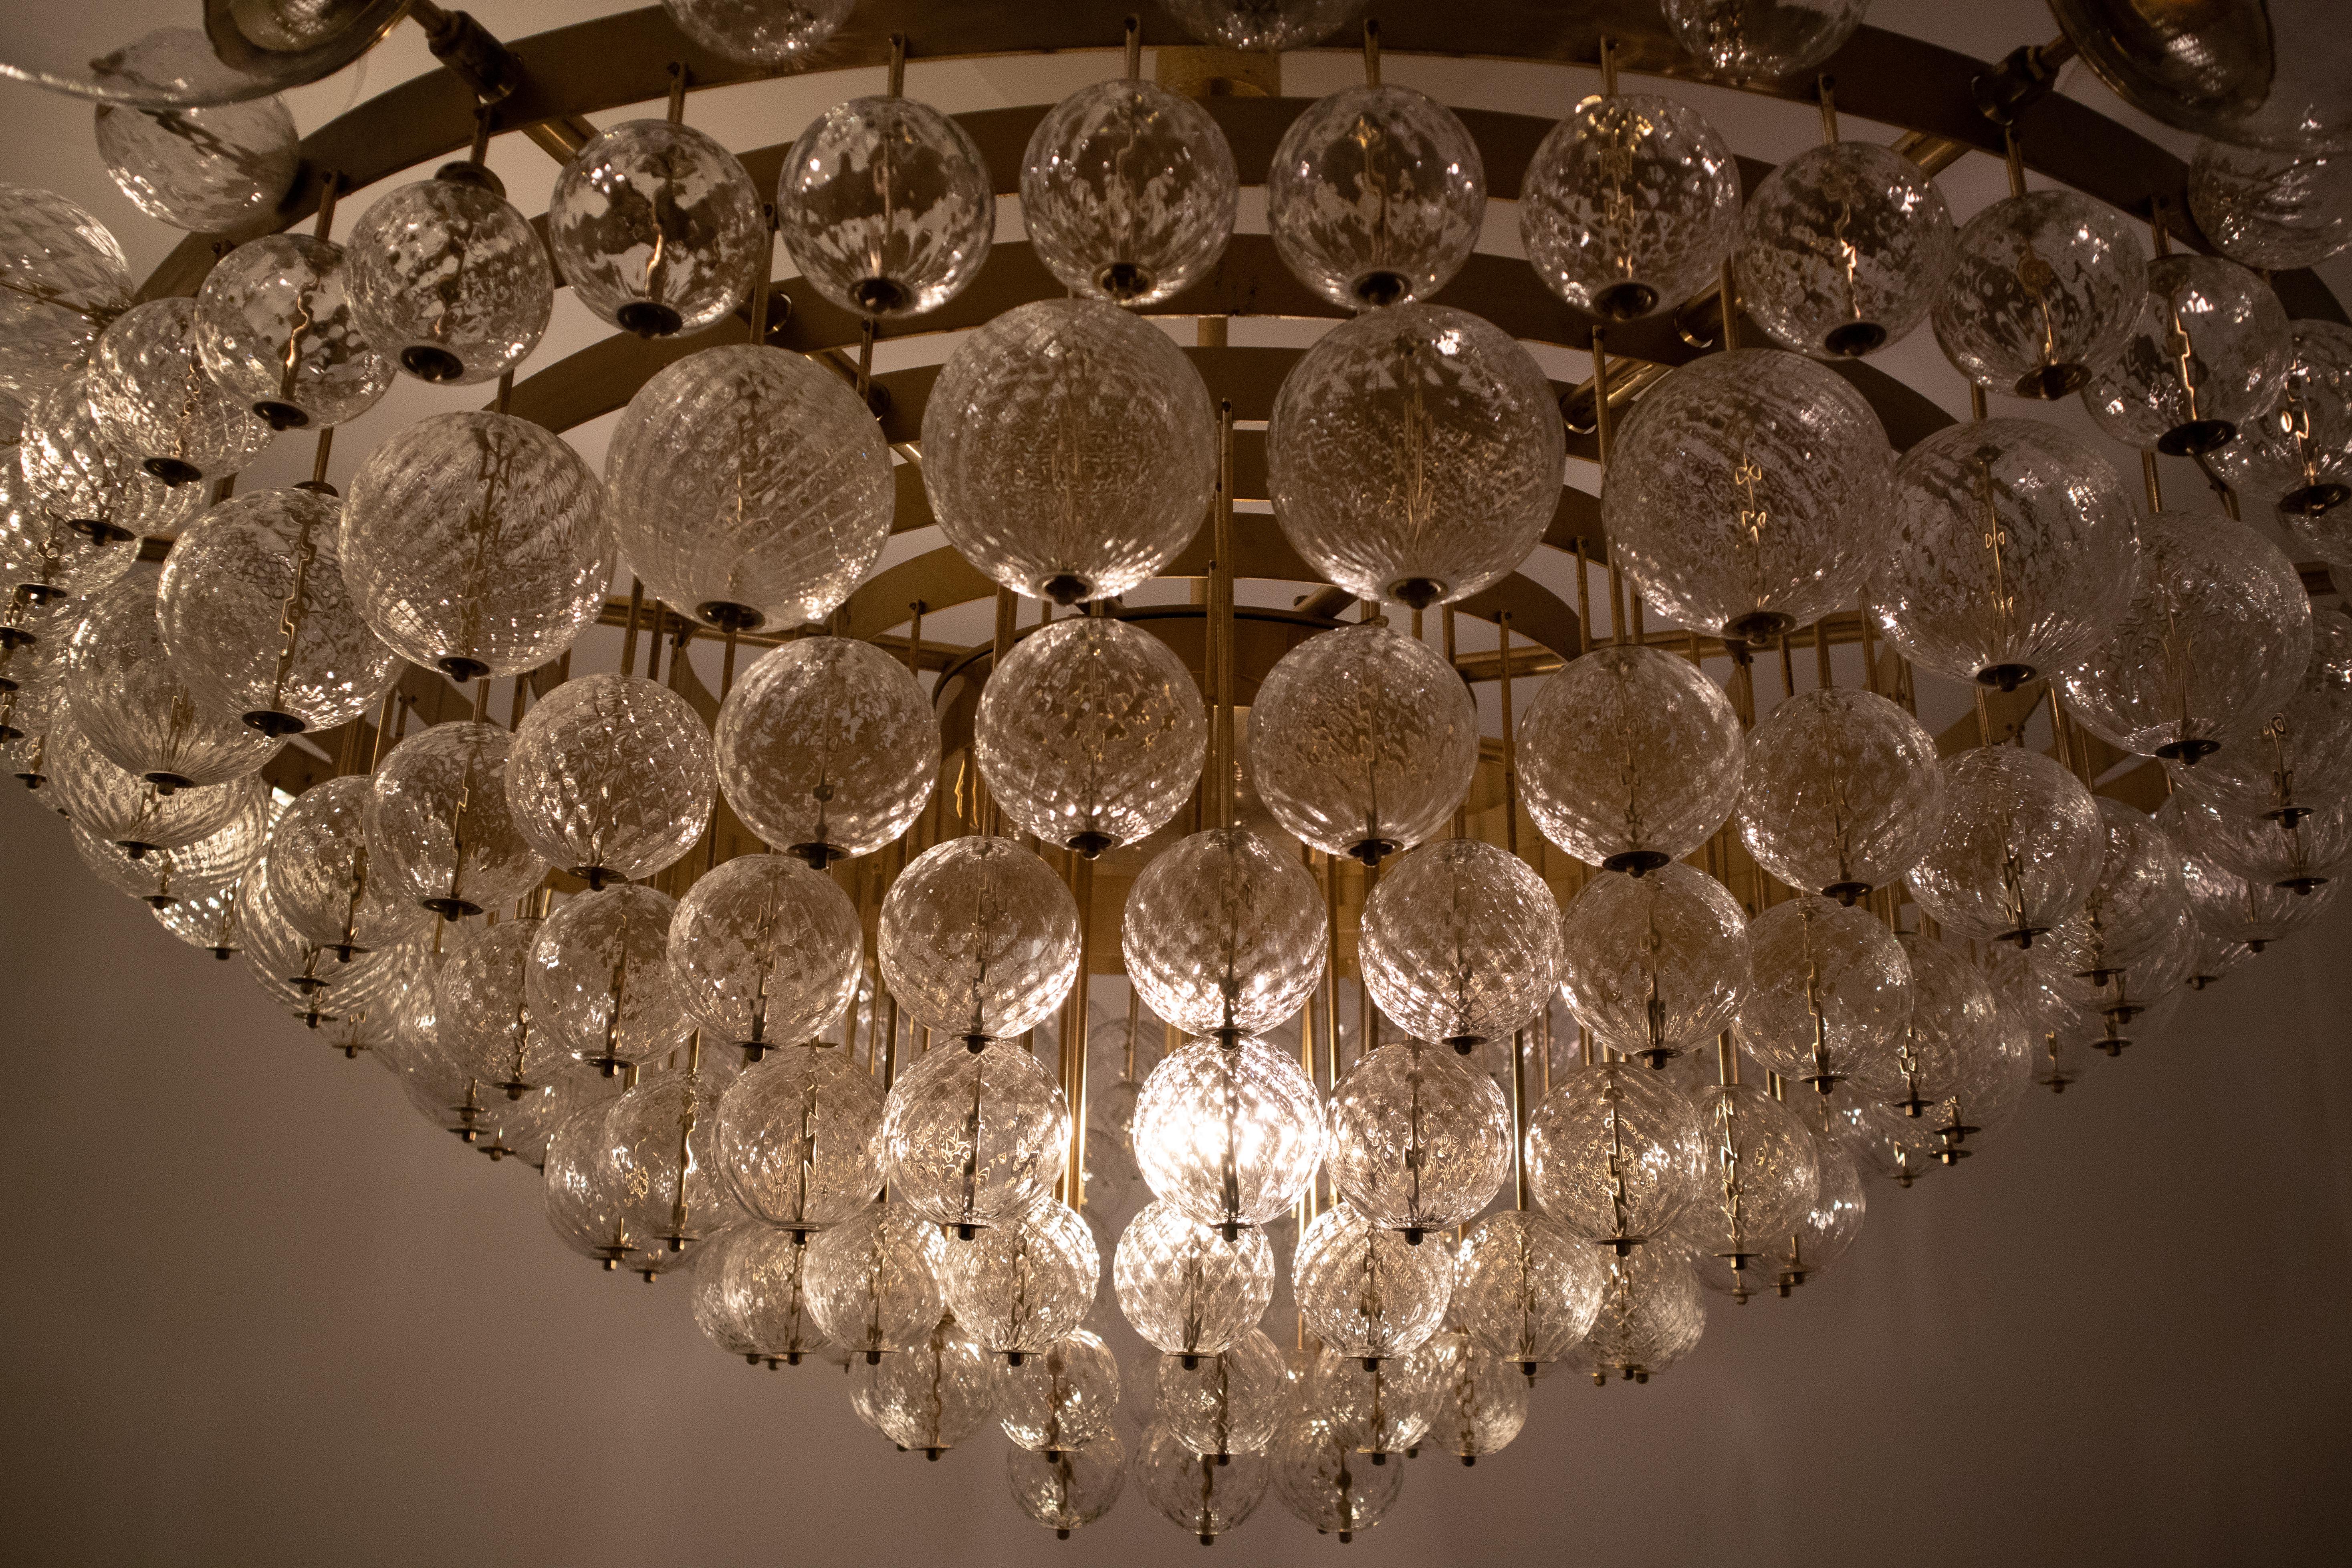 Austrian Extremely Large Hotel Chandelier with Brass Fixture and Structured Glass Globes